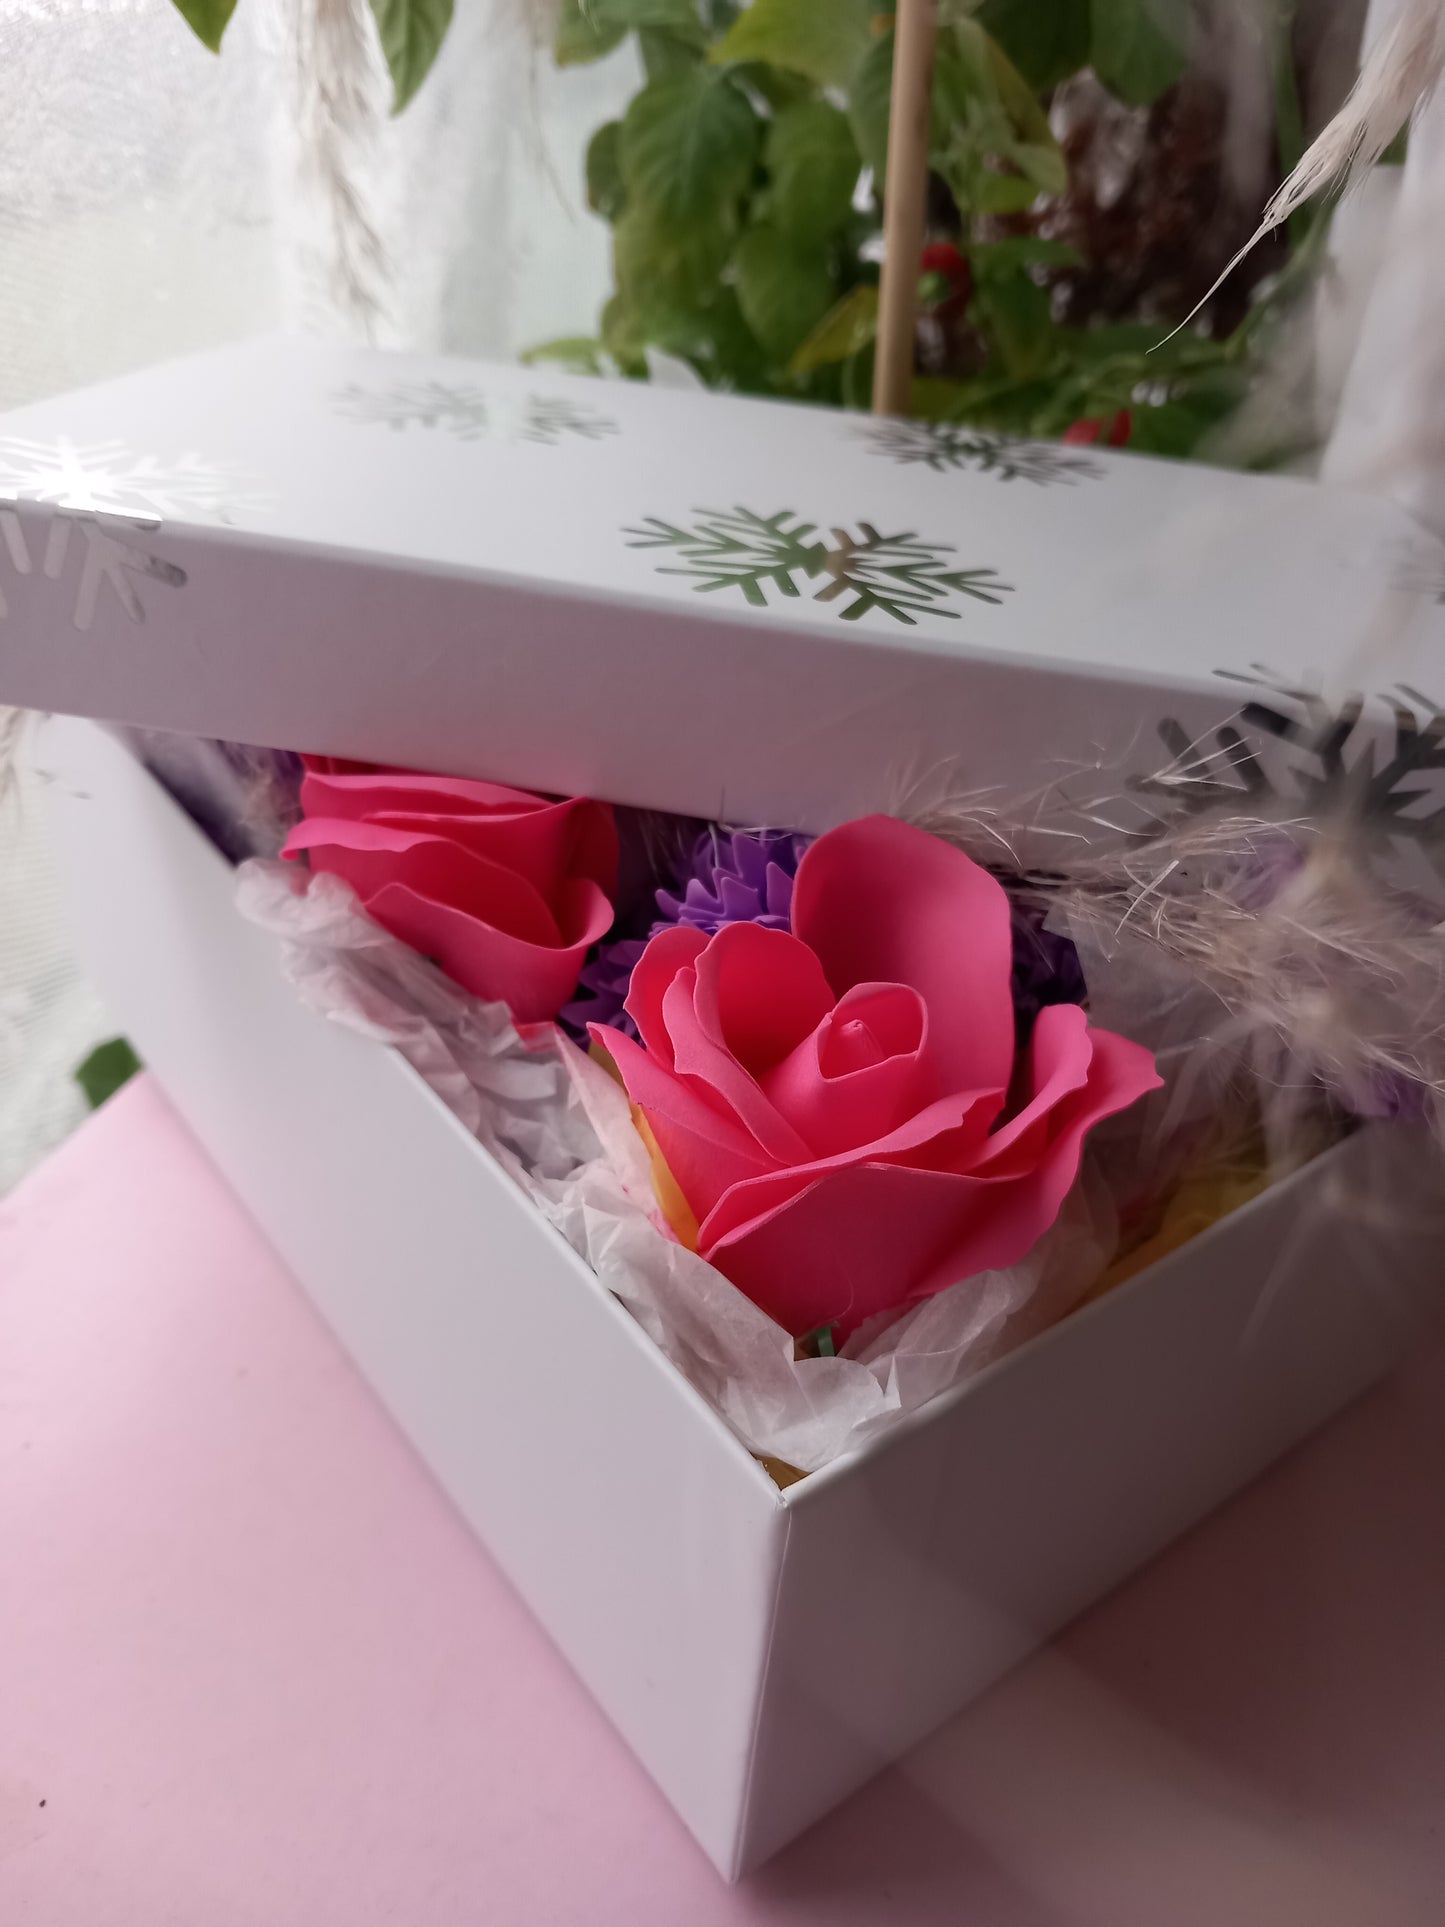 FLOWER SOAP IN WHITE DISPLAY BOX